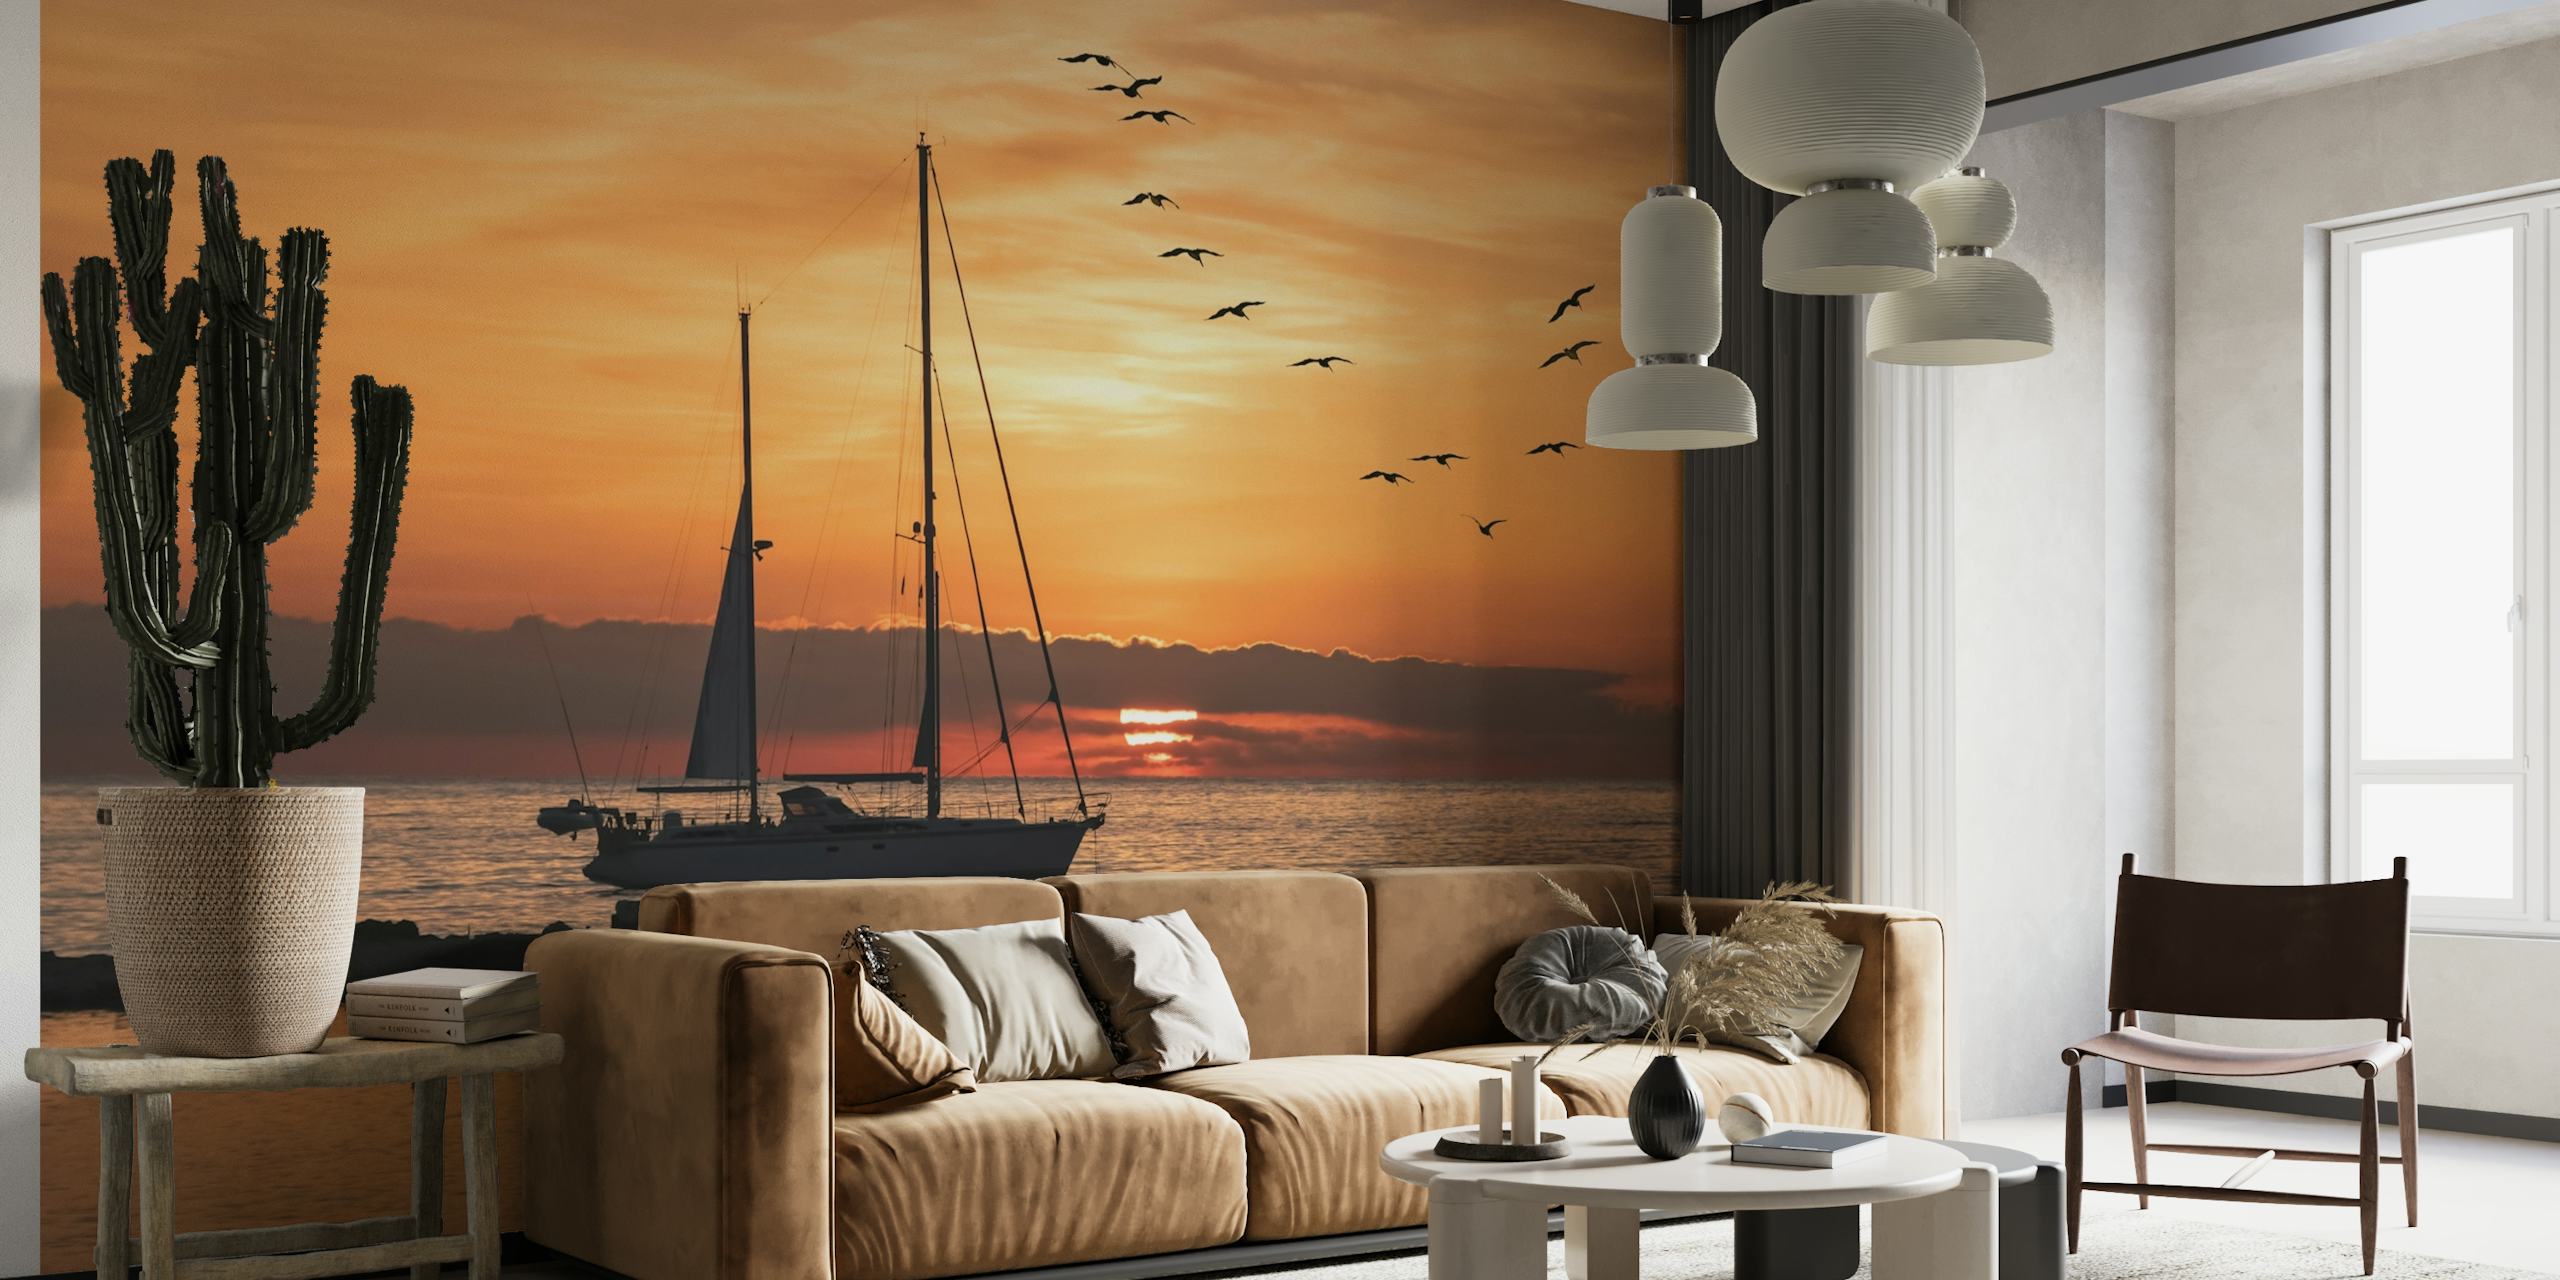 Sailboat silhouette against a sunset backdrop with flying birds over the sea wall mural